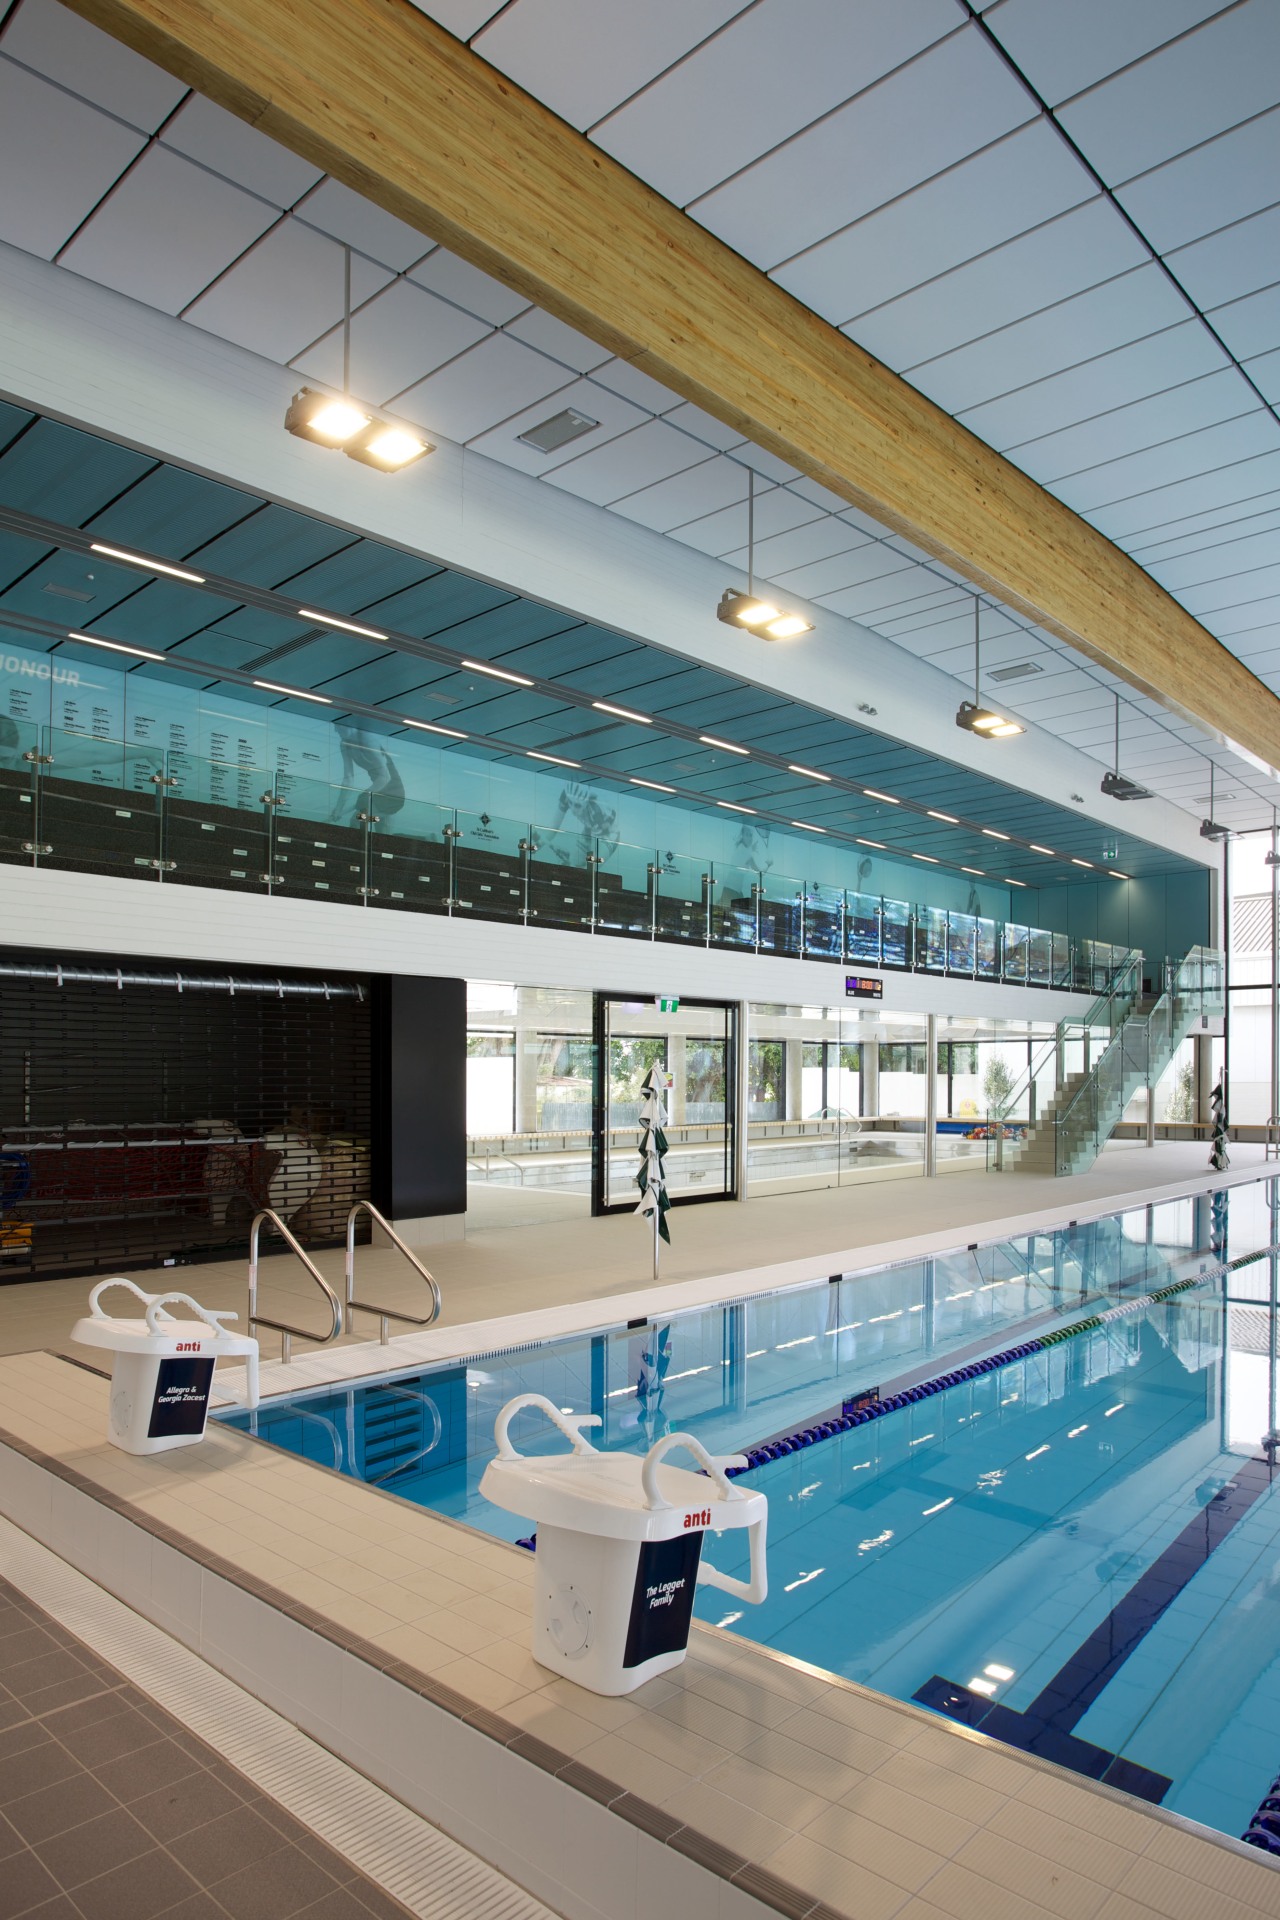 New school centre with pool, fitness centre, health architecture, daylighting, glass, leisure, leisure centre, sport venue, structure, swimming pool, gray